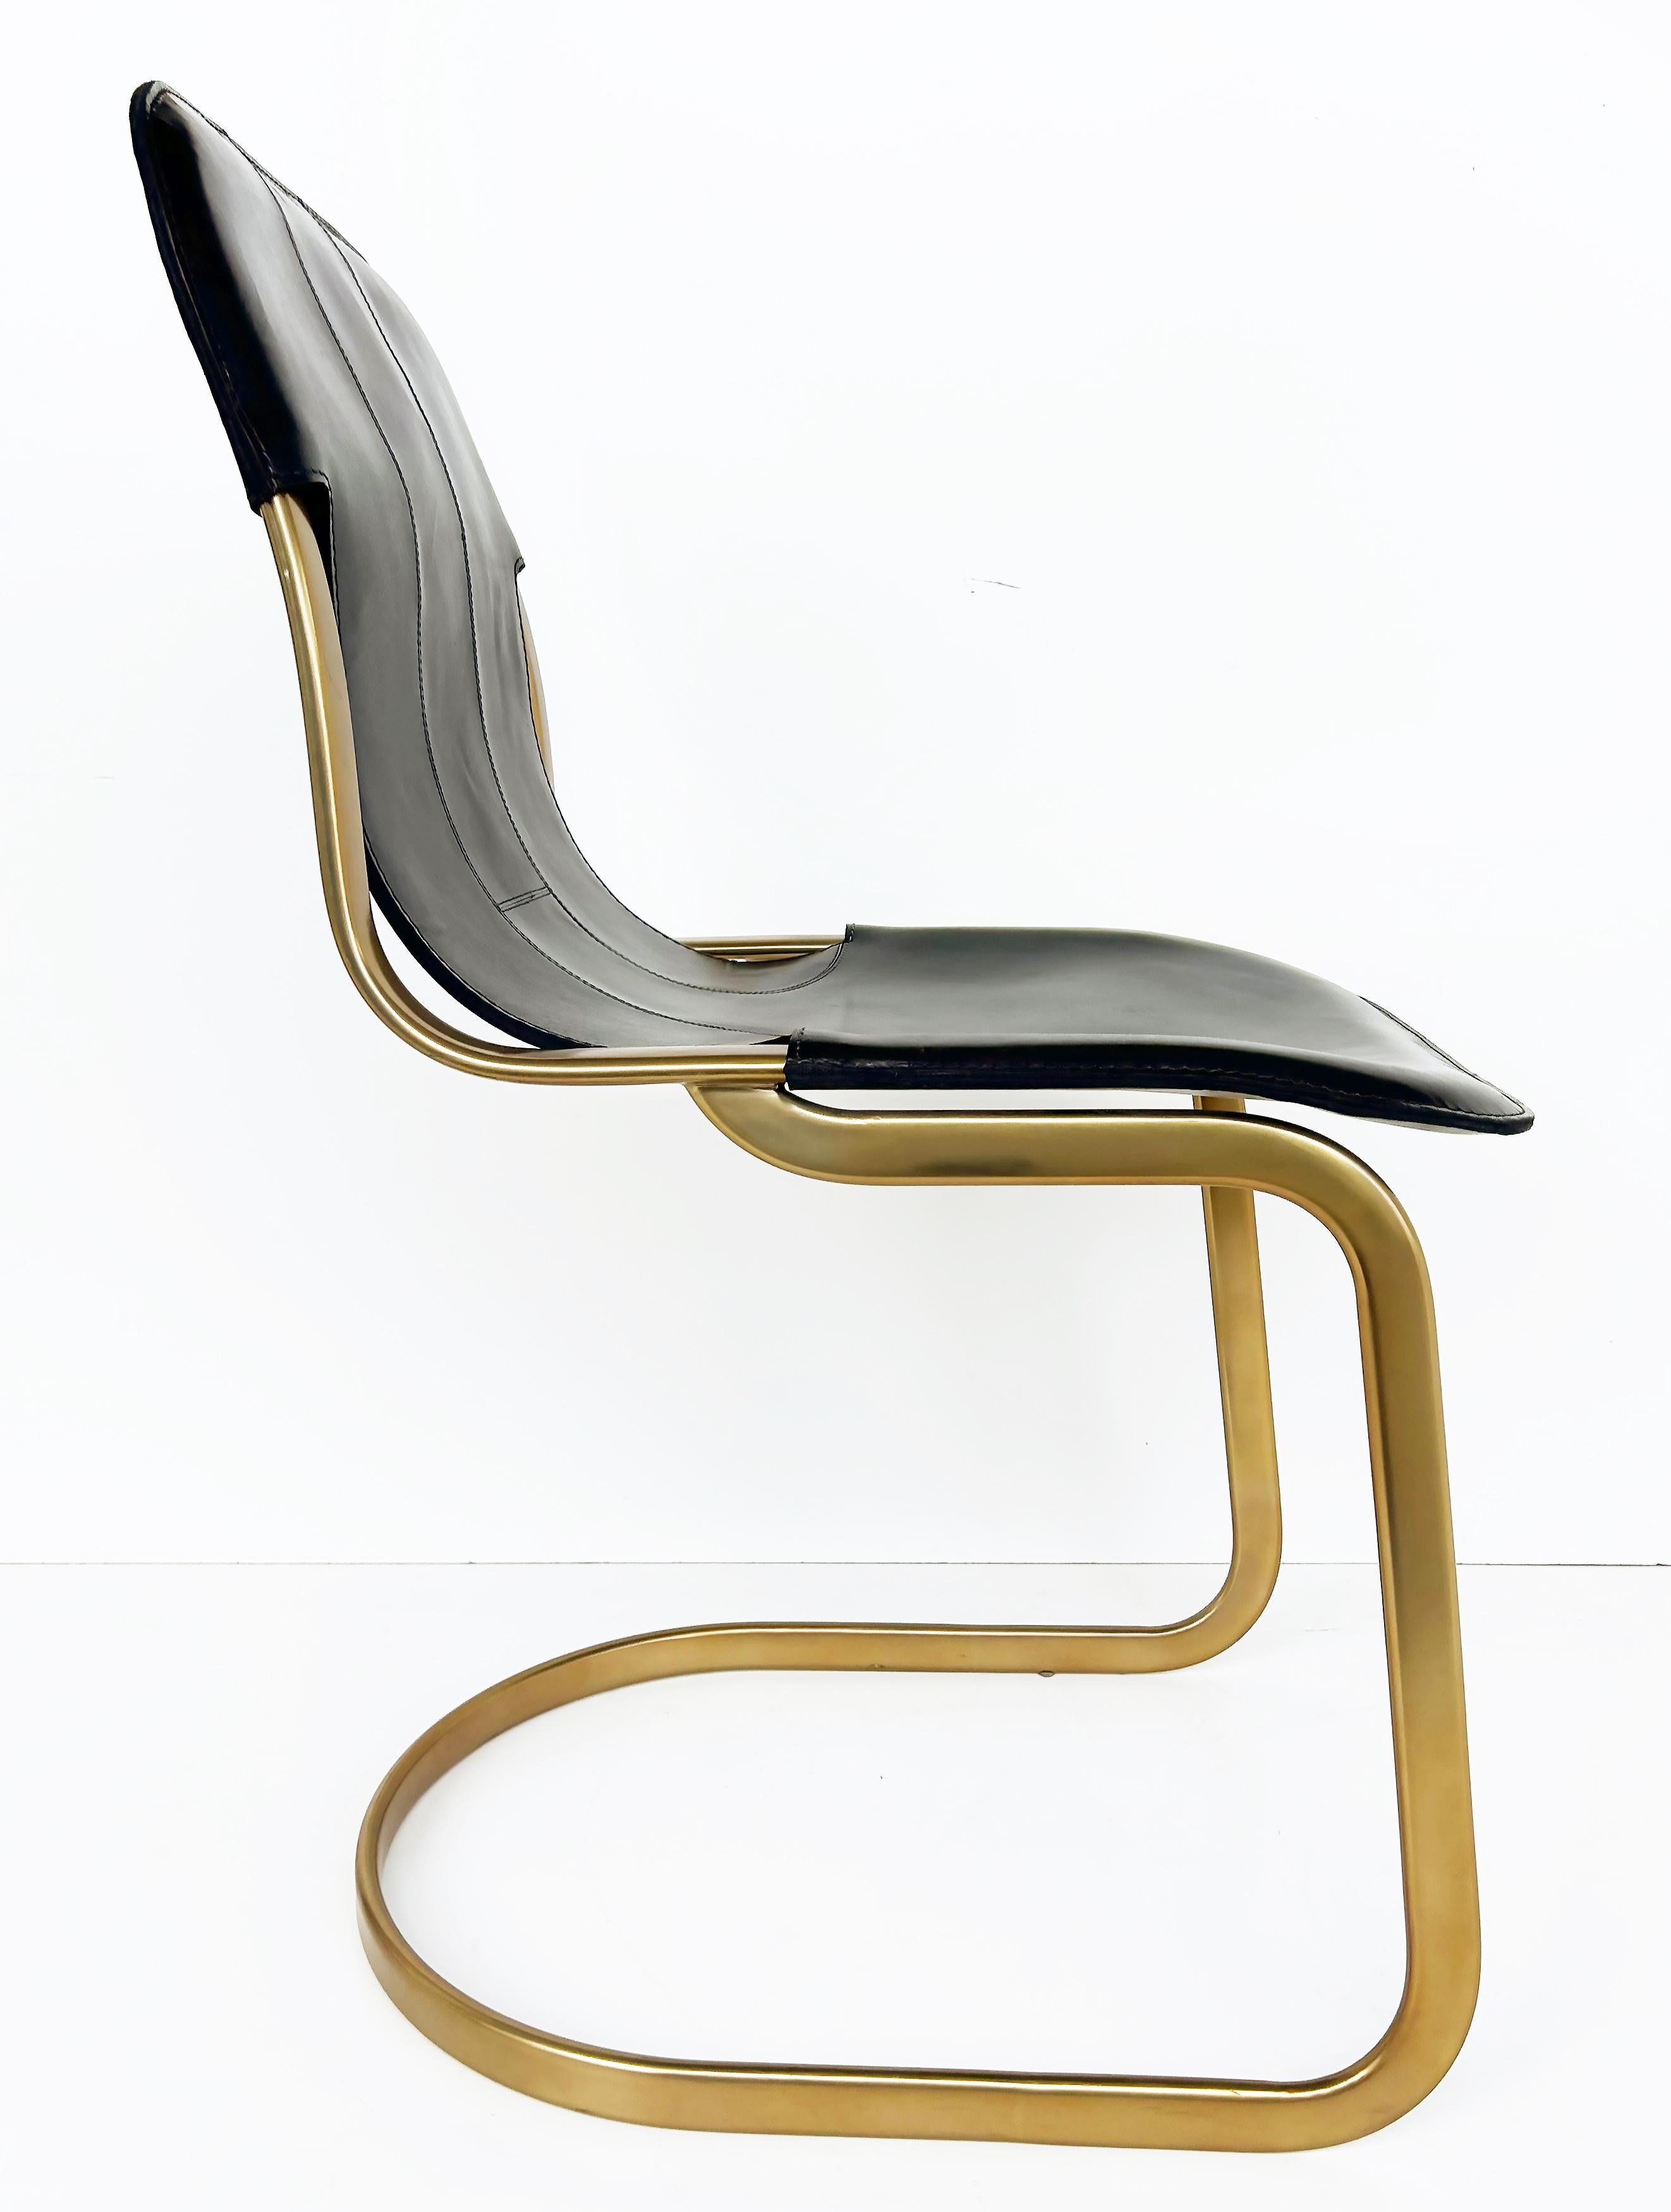 Brass Plated Leather Cantilevered Dining Chairs After Willy Rizzo, Set of 6 In Good Condition For Sale In Miami, FL